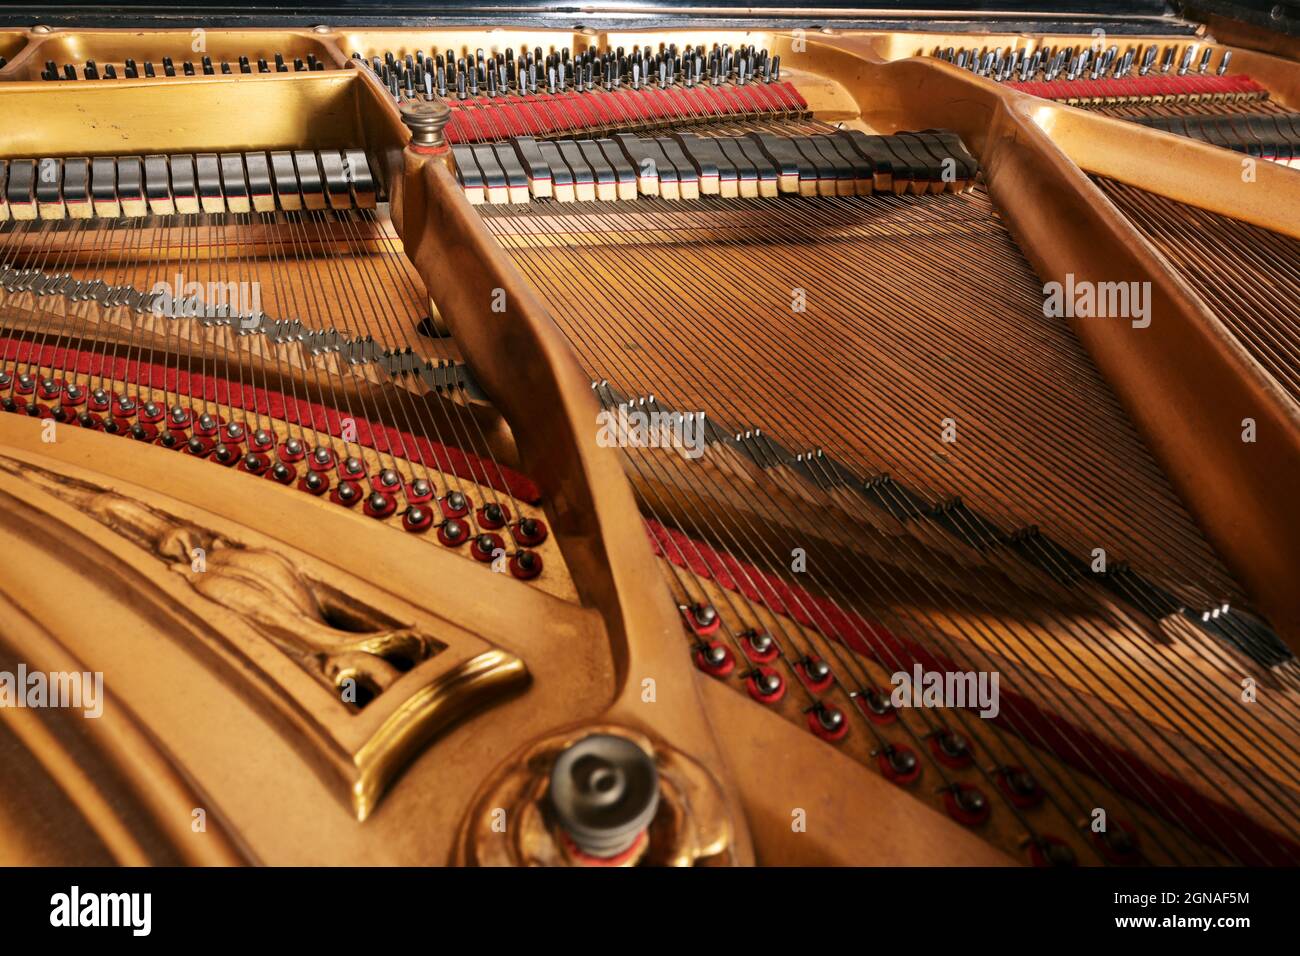 Inside an older grand piano with golden painted metal frame, strings,  hammer, damper and red felt, showing the mechanics of the acoustic musical  instr Stock Photo - Alamy